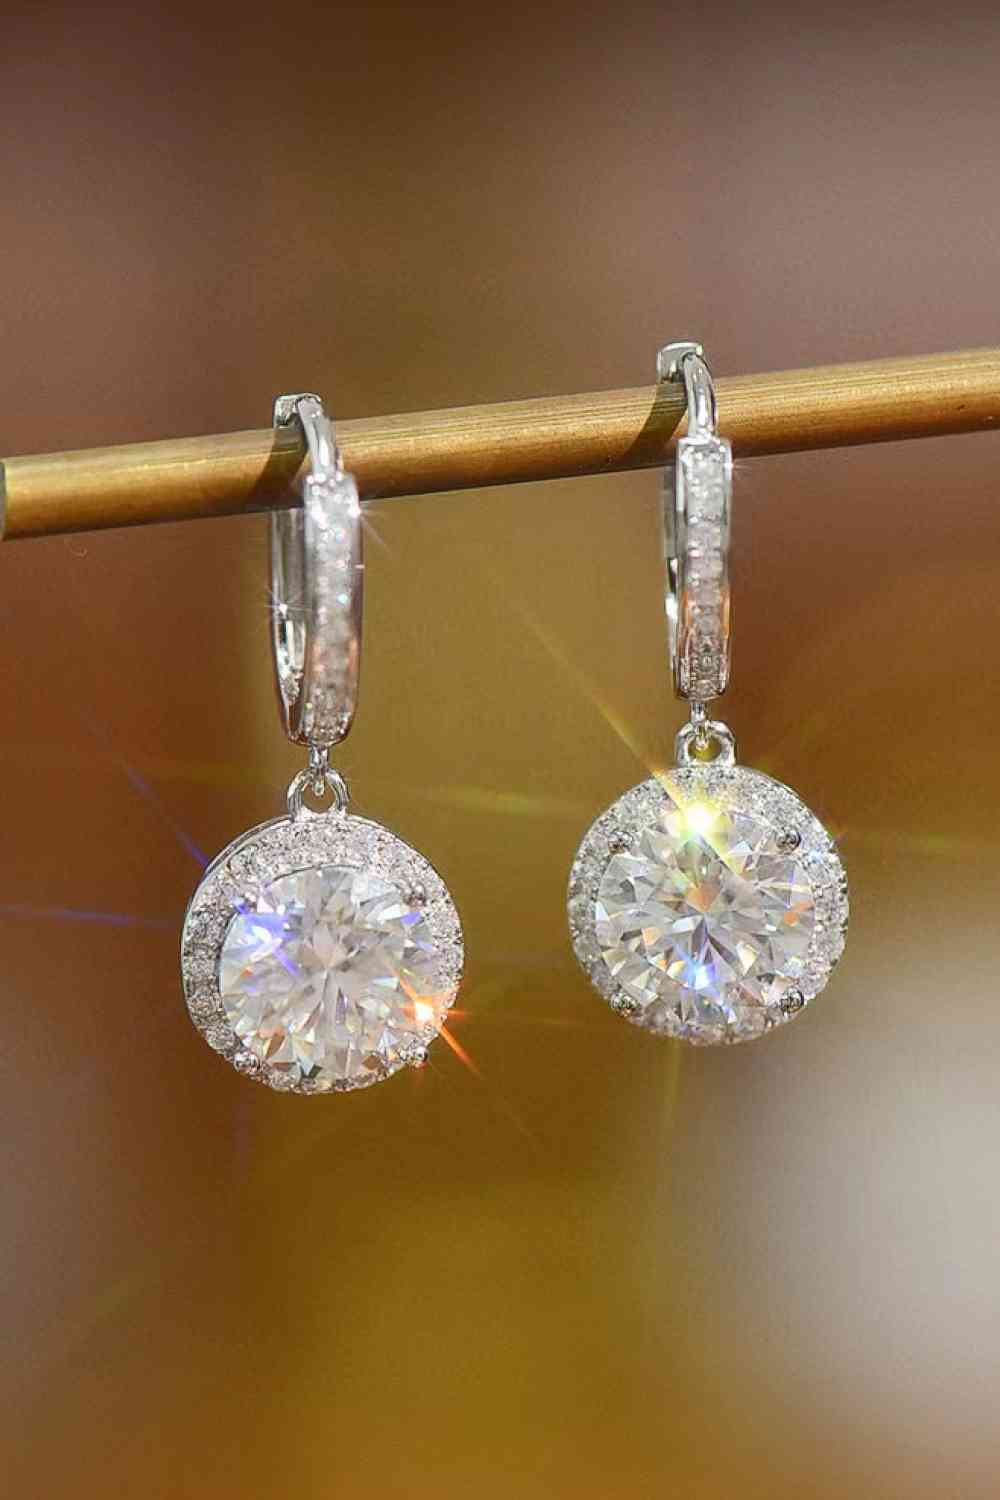 a pair of diamond earrings hanging from a hook